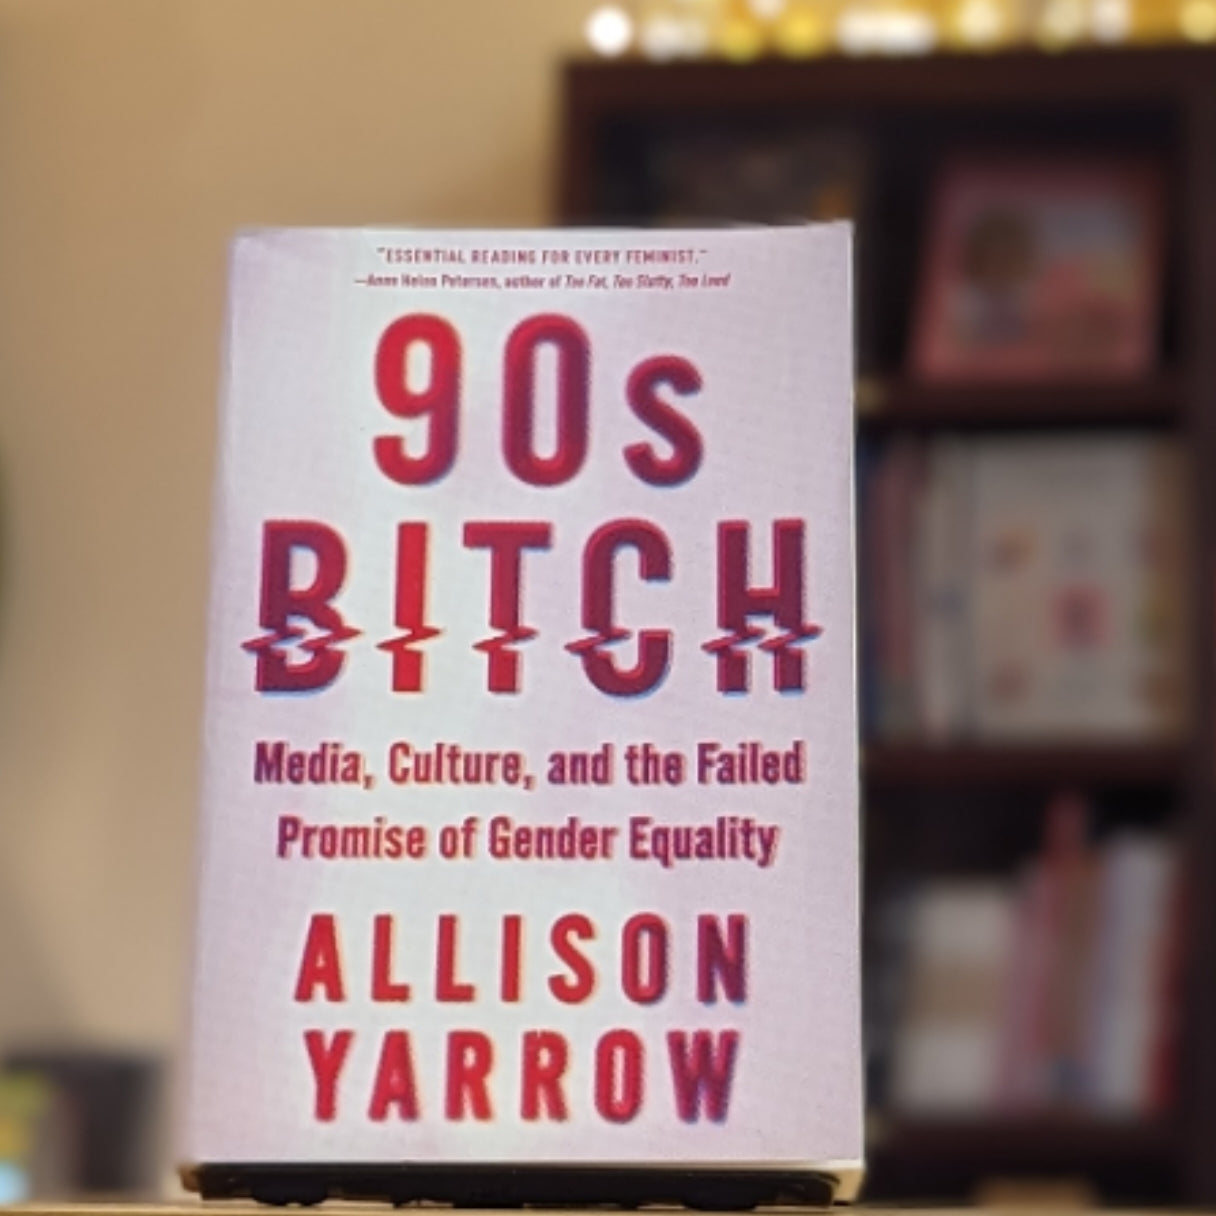 90s Bitch: Media, Culture, and the Failed Promise of Gender Equality